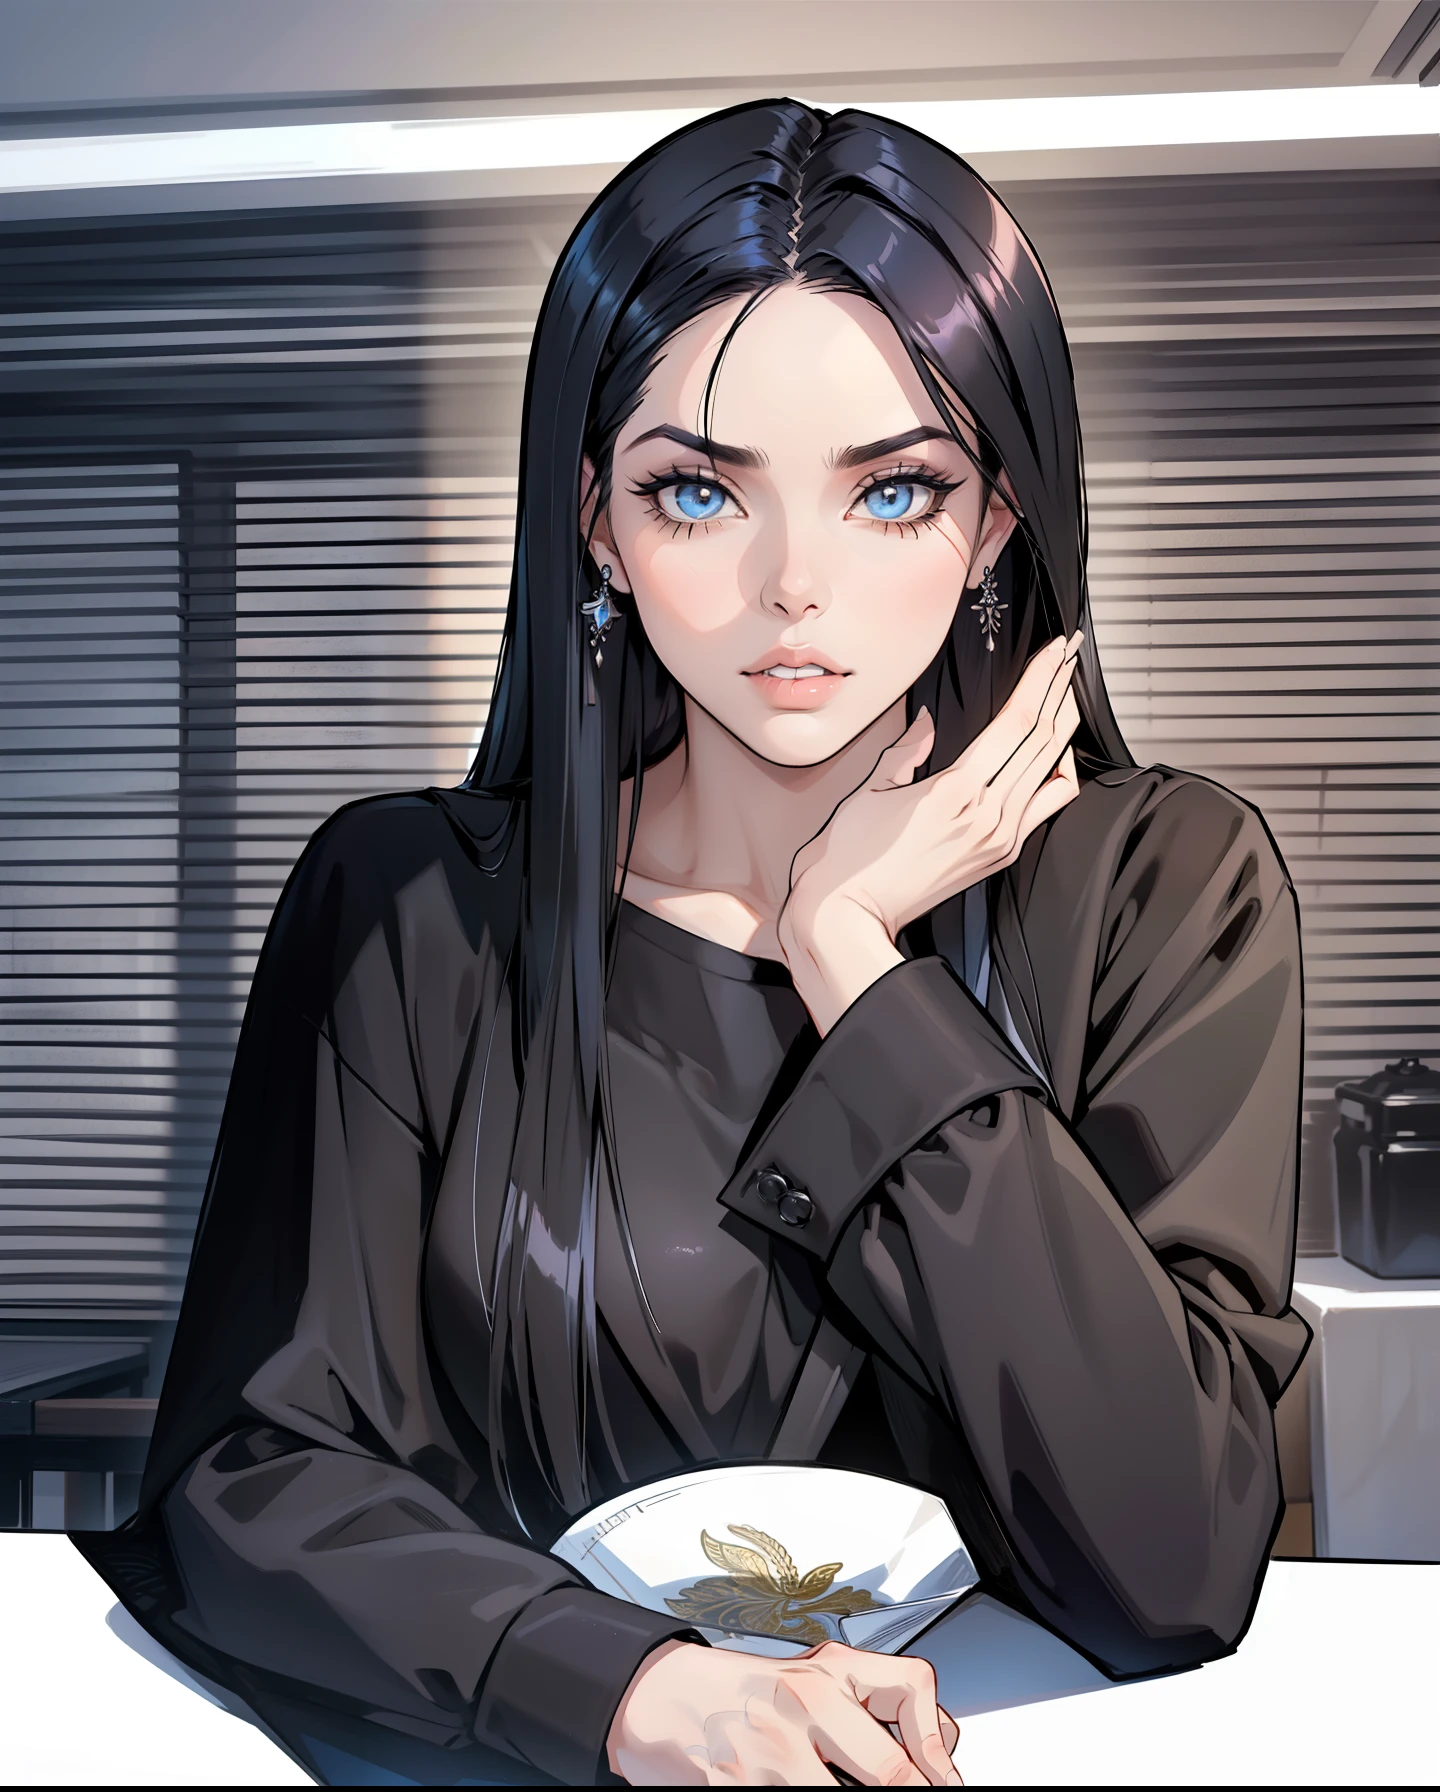 ((1girl))), ((toned)), male focus, Masterpiece artwork, high qualiy, (Masterpiece artwork:1.2), (best qualityer:1.2), shining skin, realisitic, ornate, intrikate, ((blackquality hair)), (long  hair), black greatcoat, expression serious, (shadows cast over the face:1.3), chic_Clothes, shadow room, Serious expression , (upperbody), Chinese traditional ink painting, (sexly)